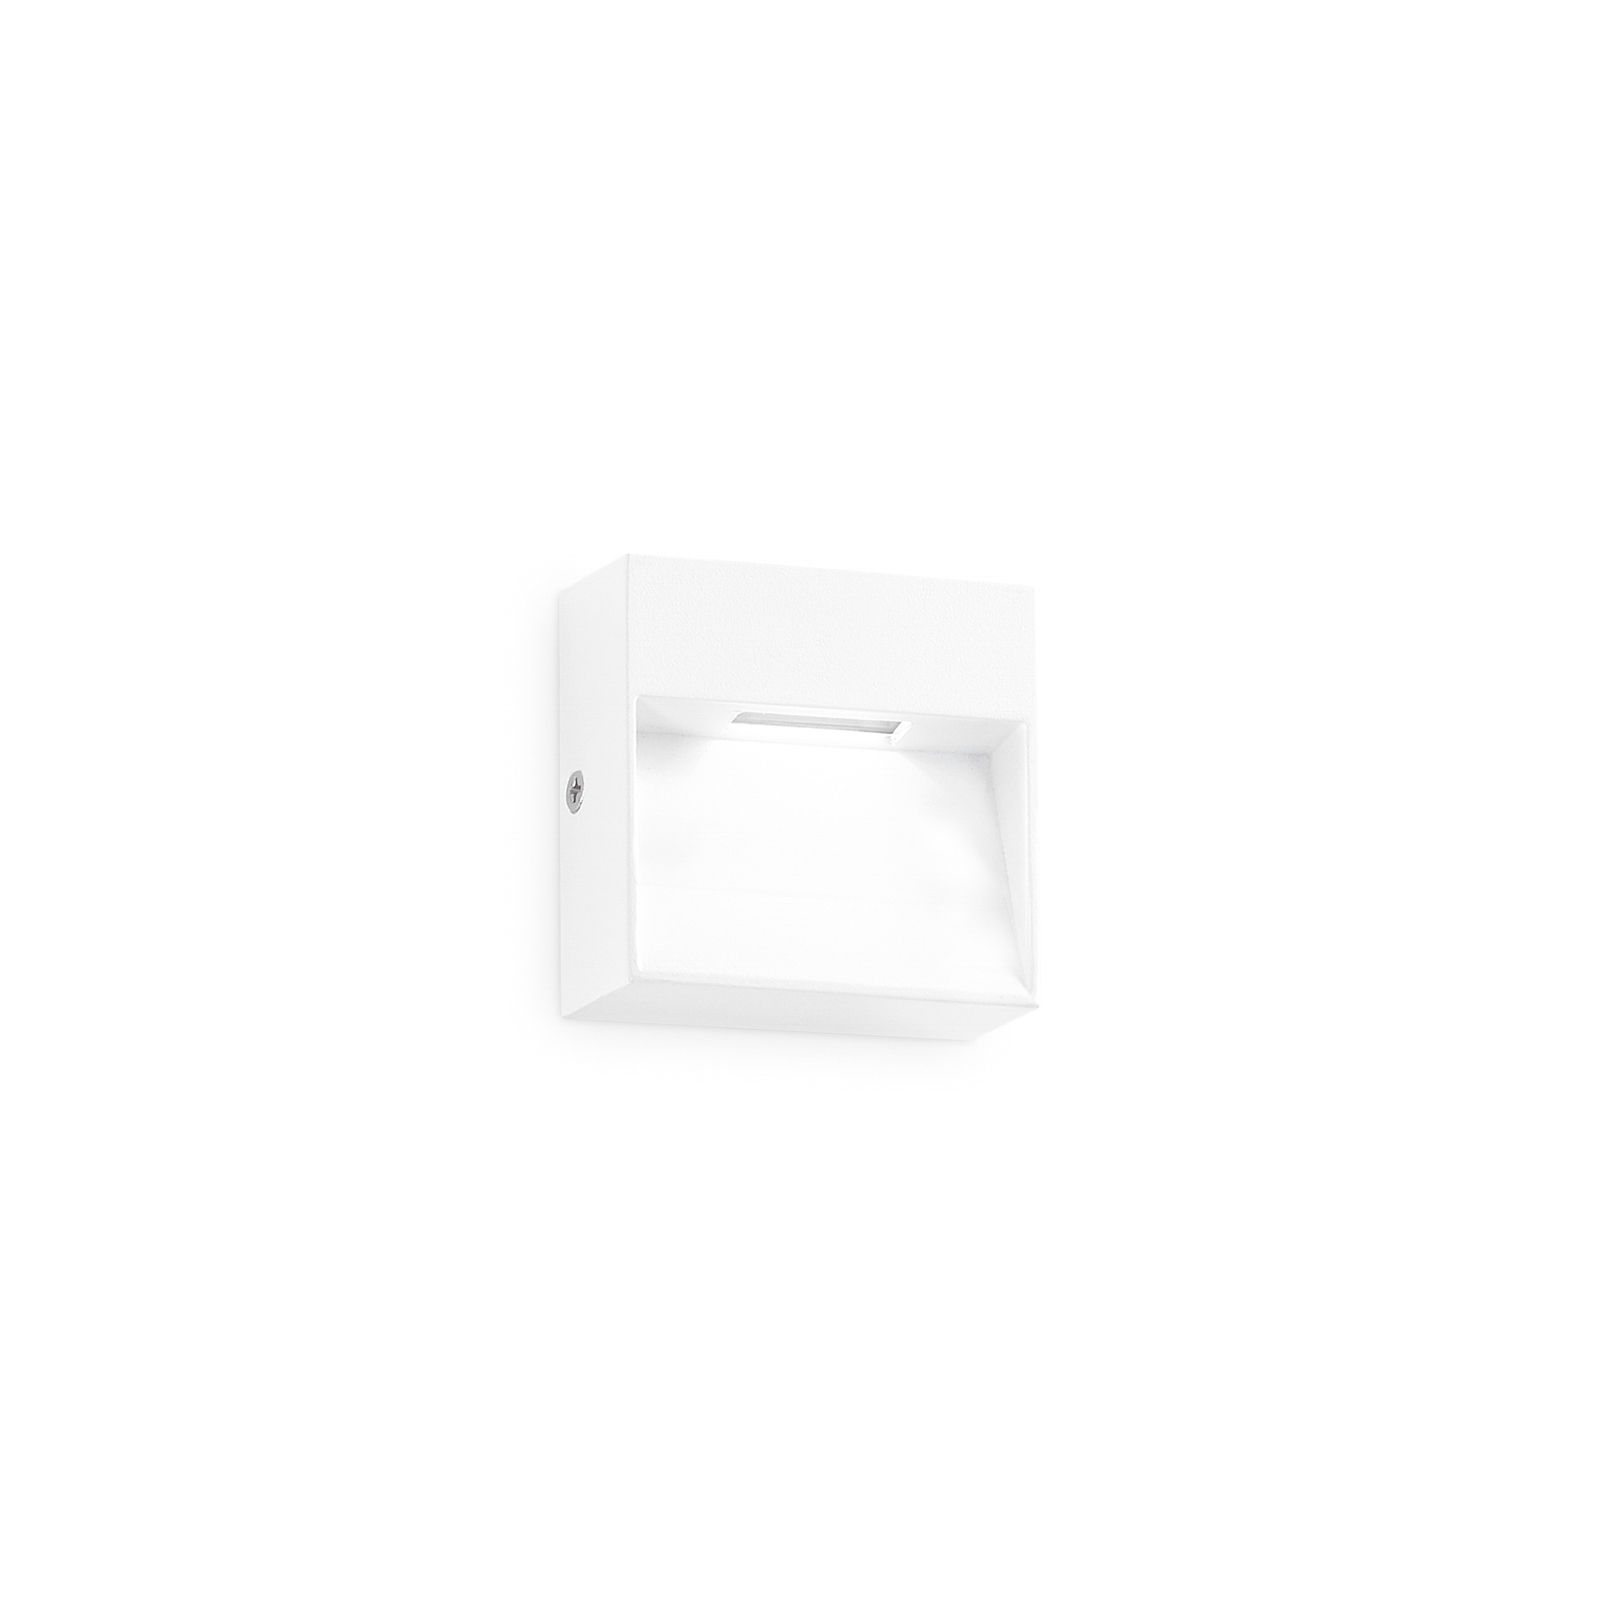 Ideal Lux LED outdoor wall light Dedra, white, 10 x 10 cm